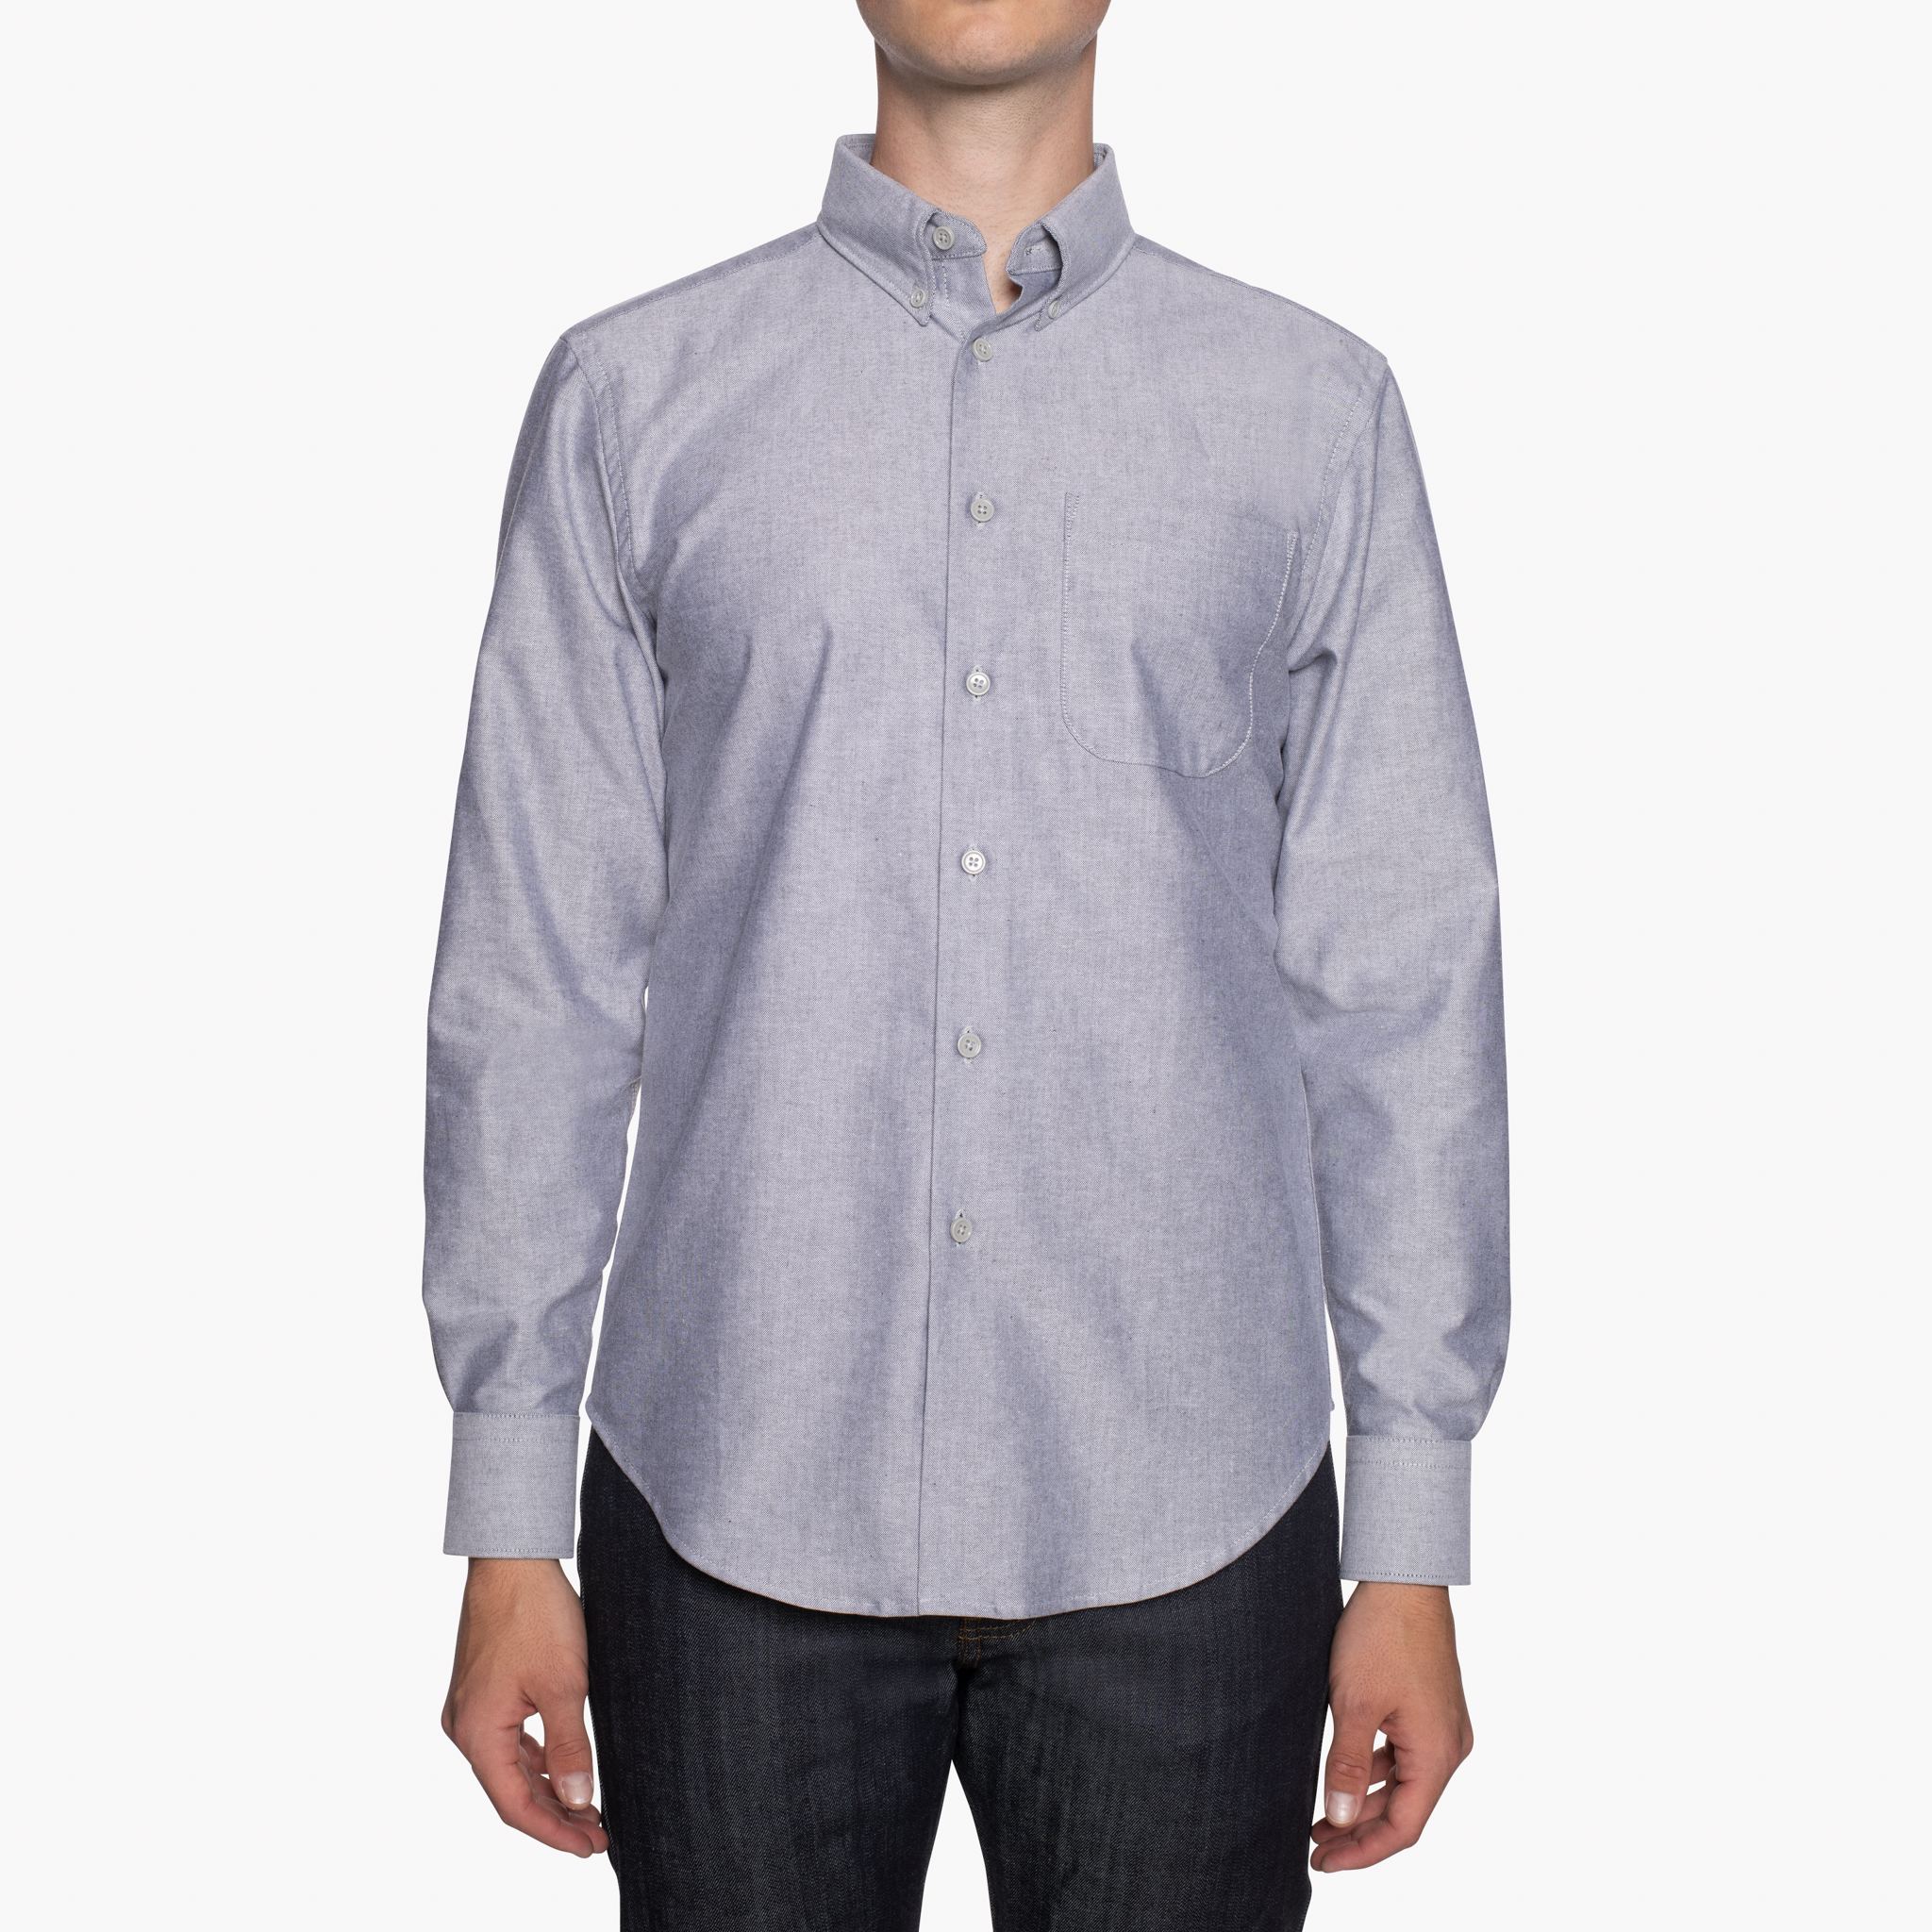  Easy Shirt - Cotton Oxford - black - front 